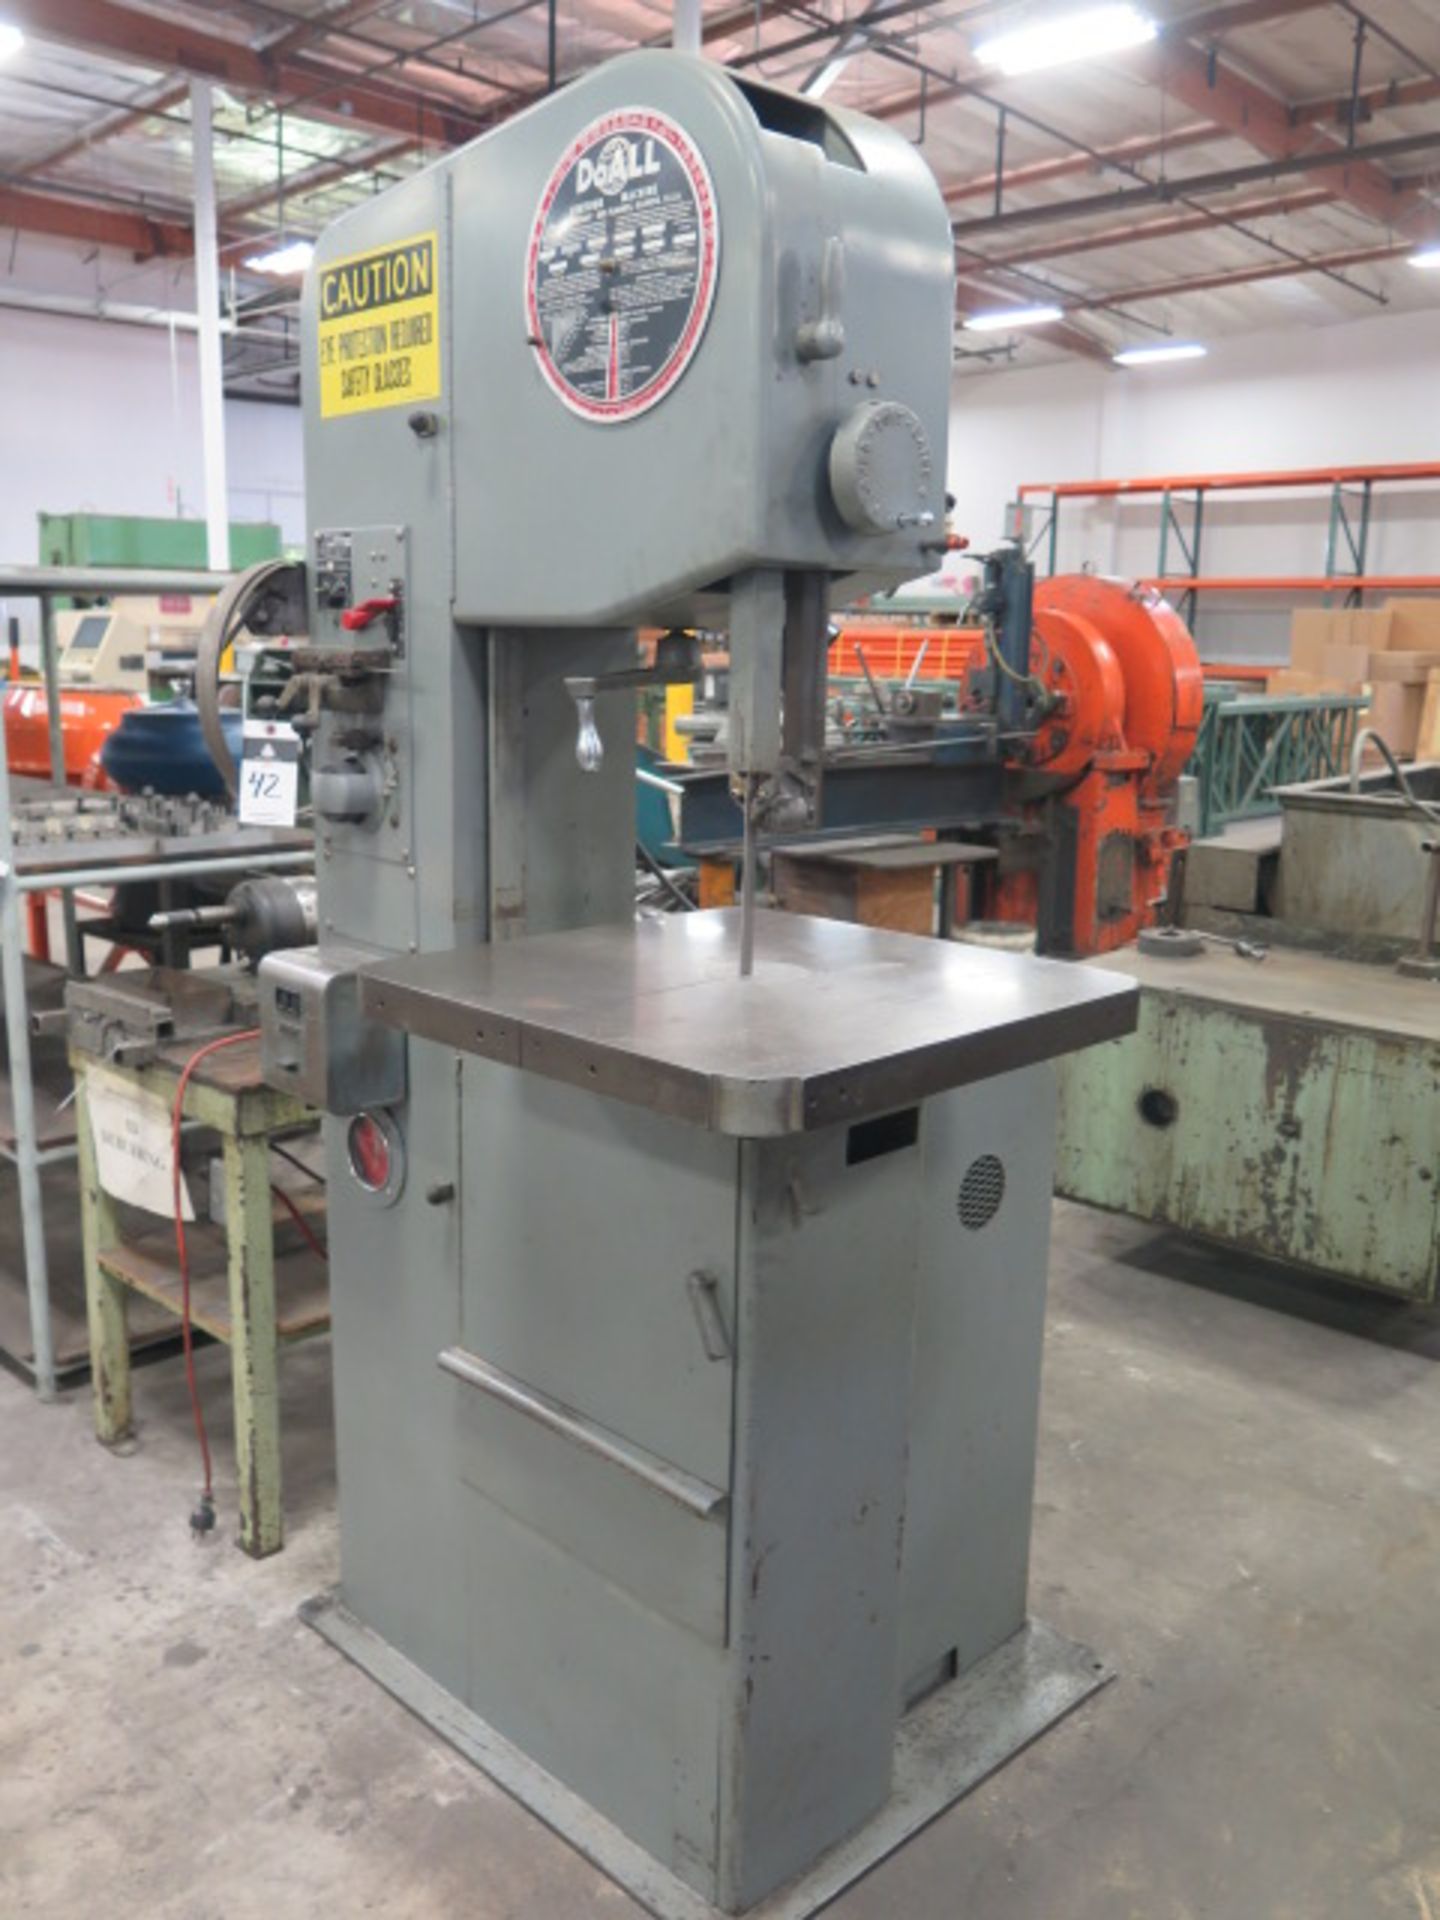 DoAll mdl. 1612-0 16" Vertical Band Saw s/n 277-71981 w/ Blade Welder, 24" x 24" Miter Table - Image 2 of 7